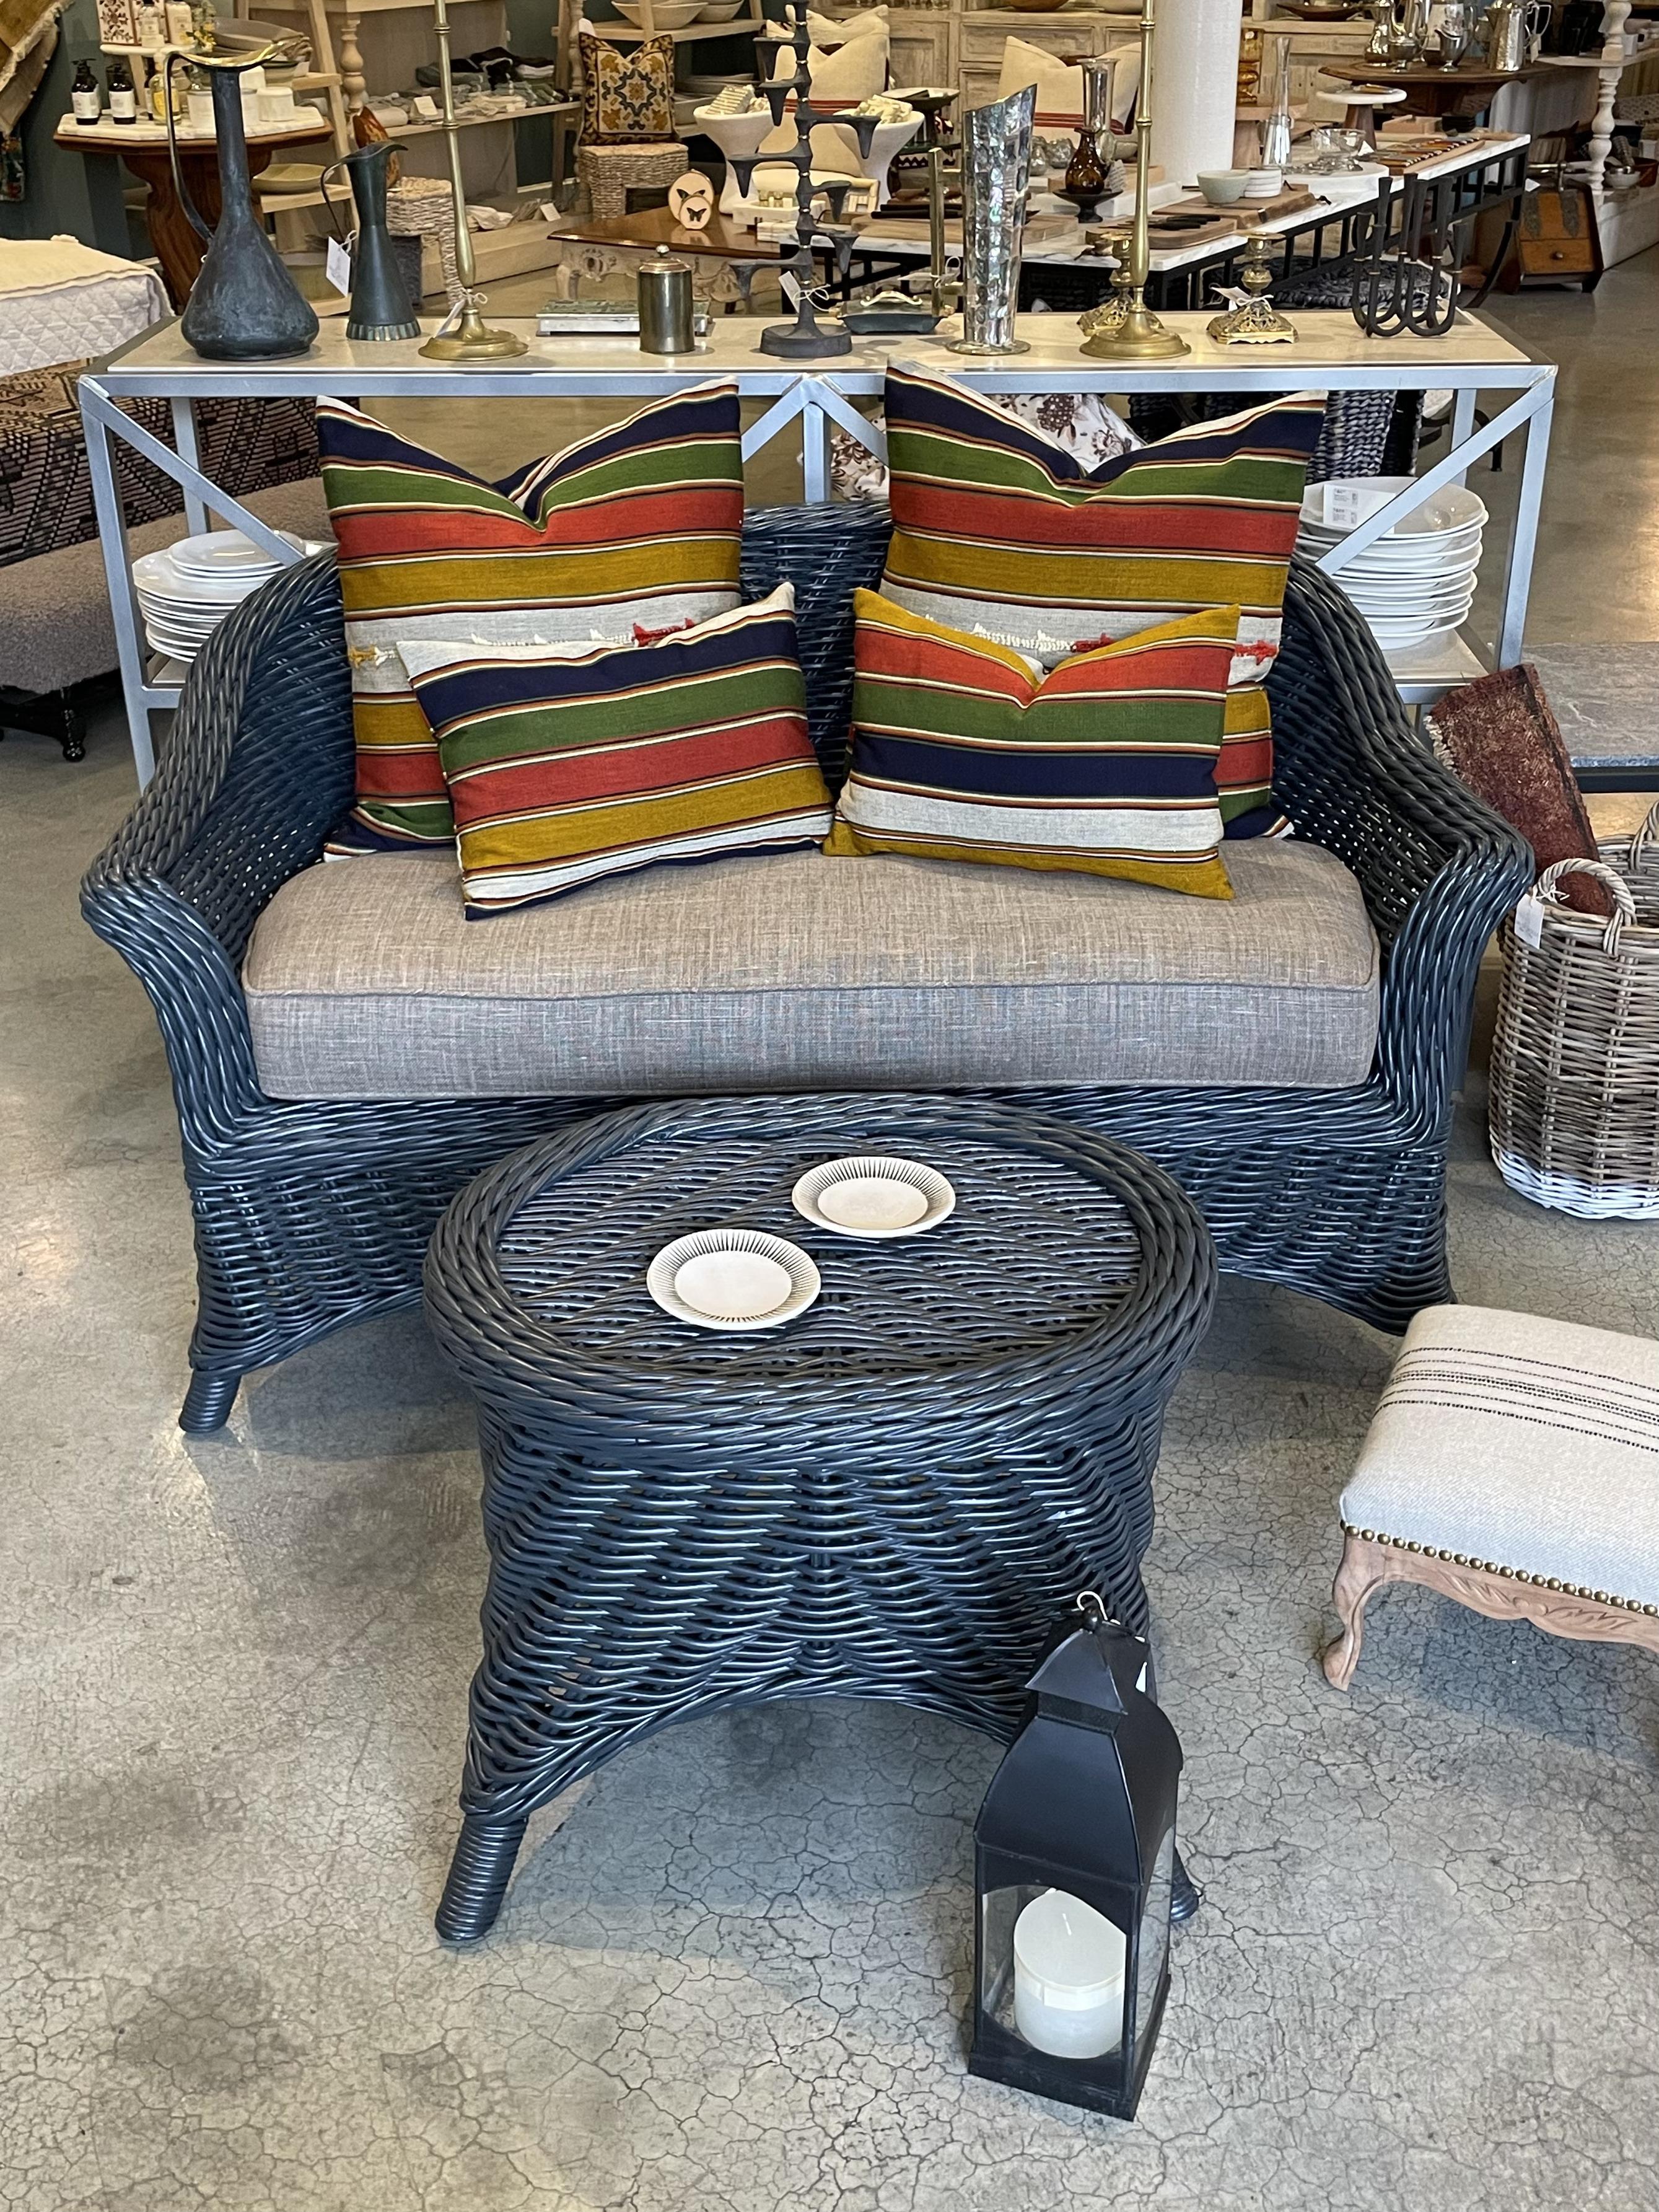 The perfect spot for an afternoon read or sharing tea for two. This lovely vintage wicker settee has been newly painted in a soothing blue/grey finish and coupled with a newly upholstered cushion in a classic complimentary taupe linen. Take a seat,